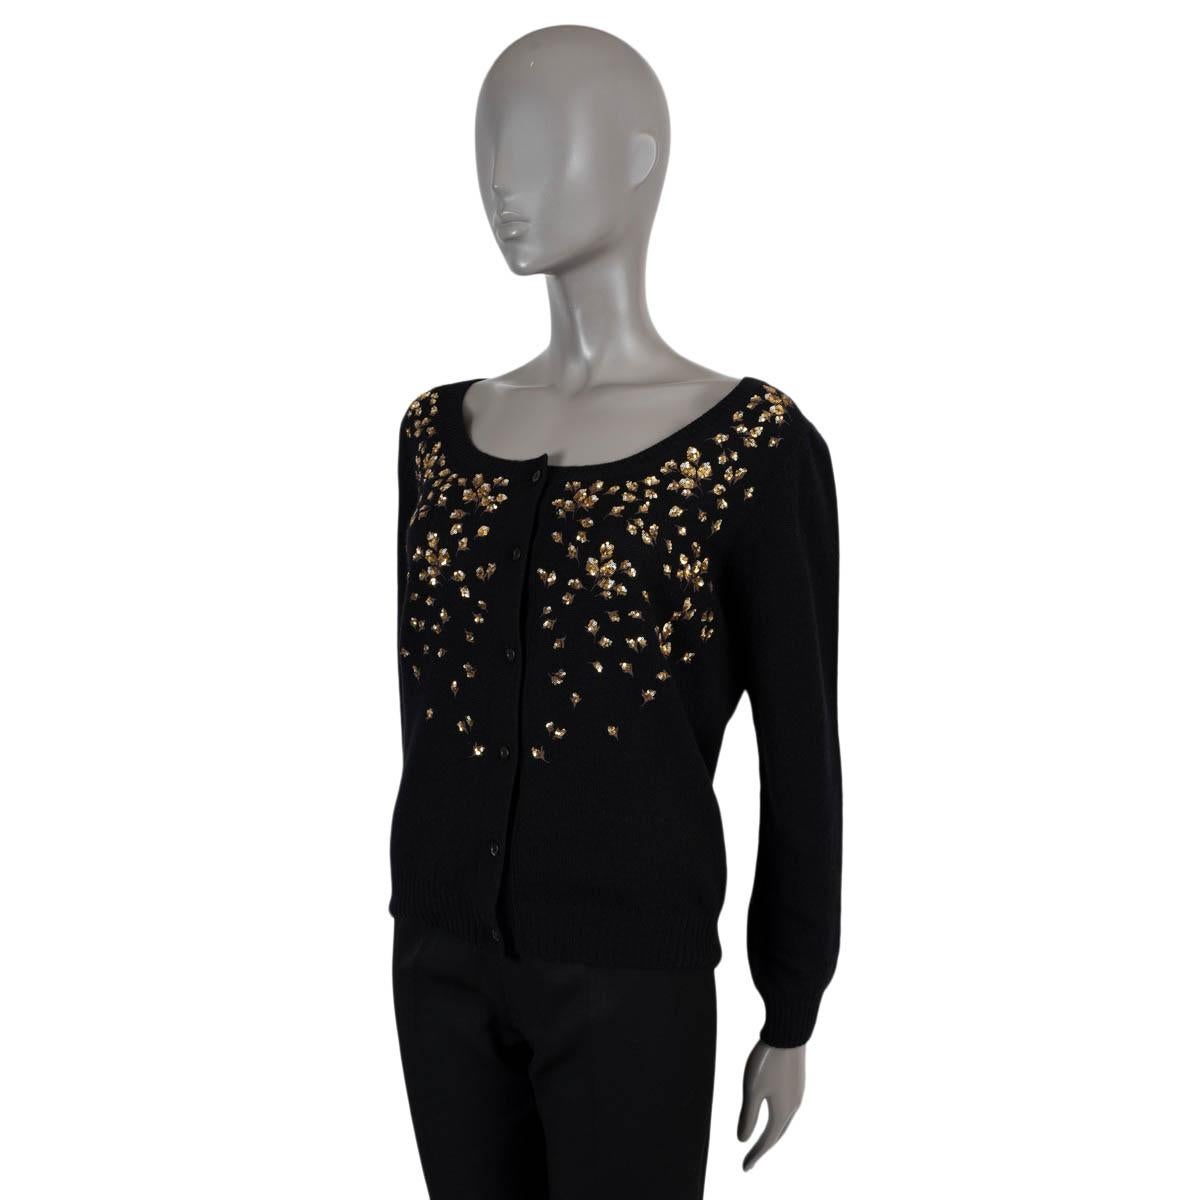 100% authentic Prada cardigan in black cashmere (100%). Features gold floral sequin embellishments, a scoop neck and rib-knit cuffs and hem. Closes with buttons on the front. Has been worn and is in excellent condition.

Measurements
Tag